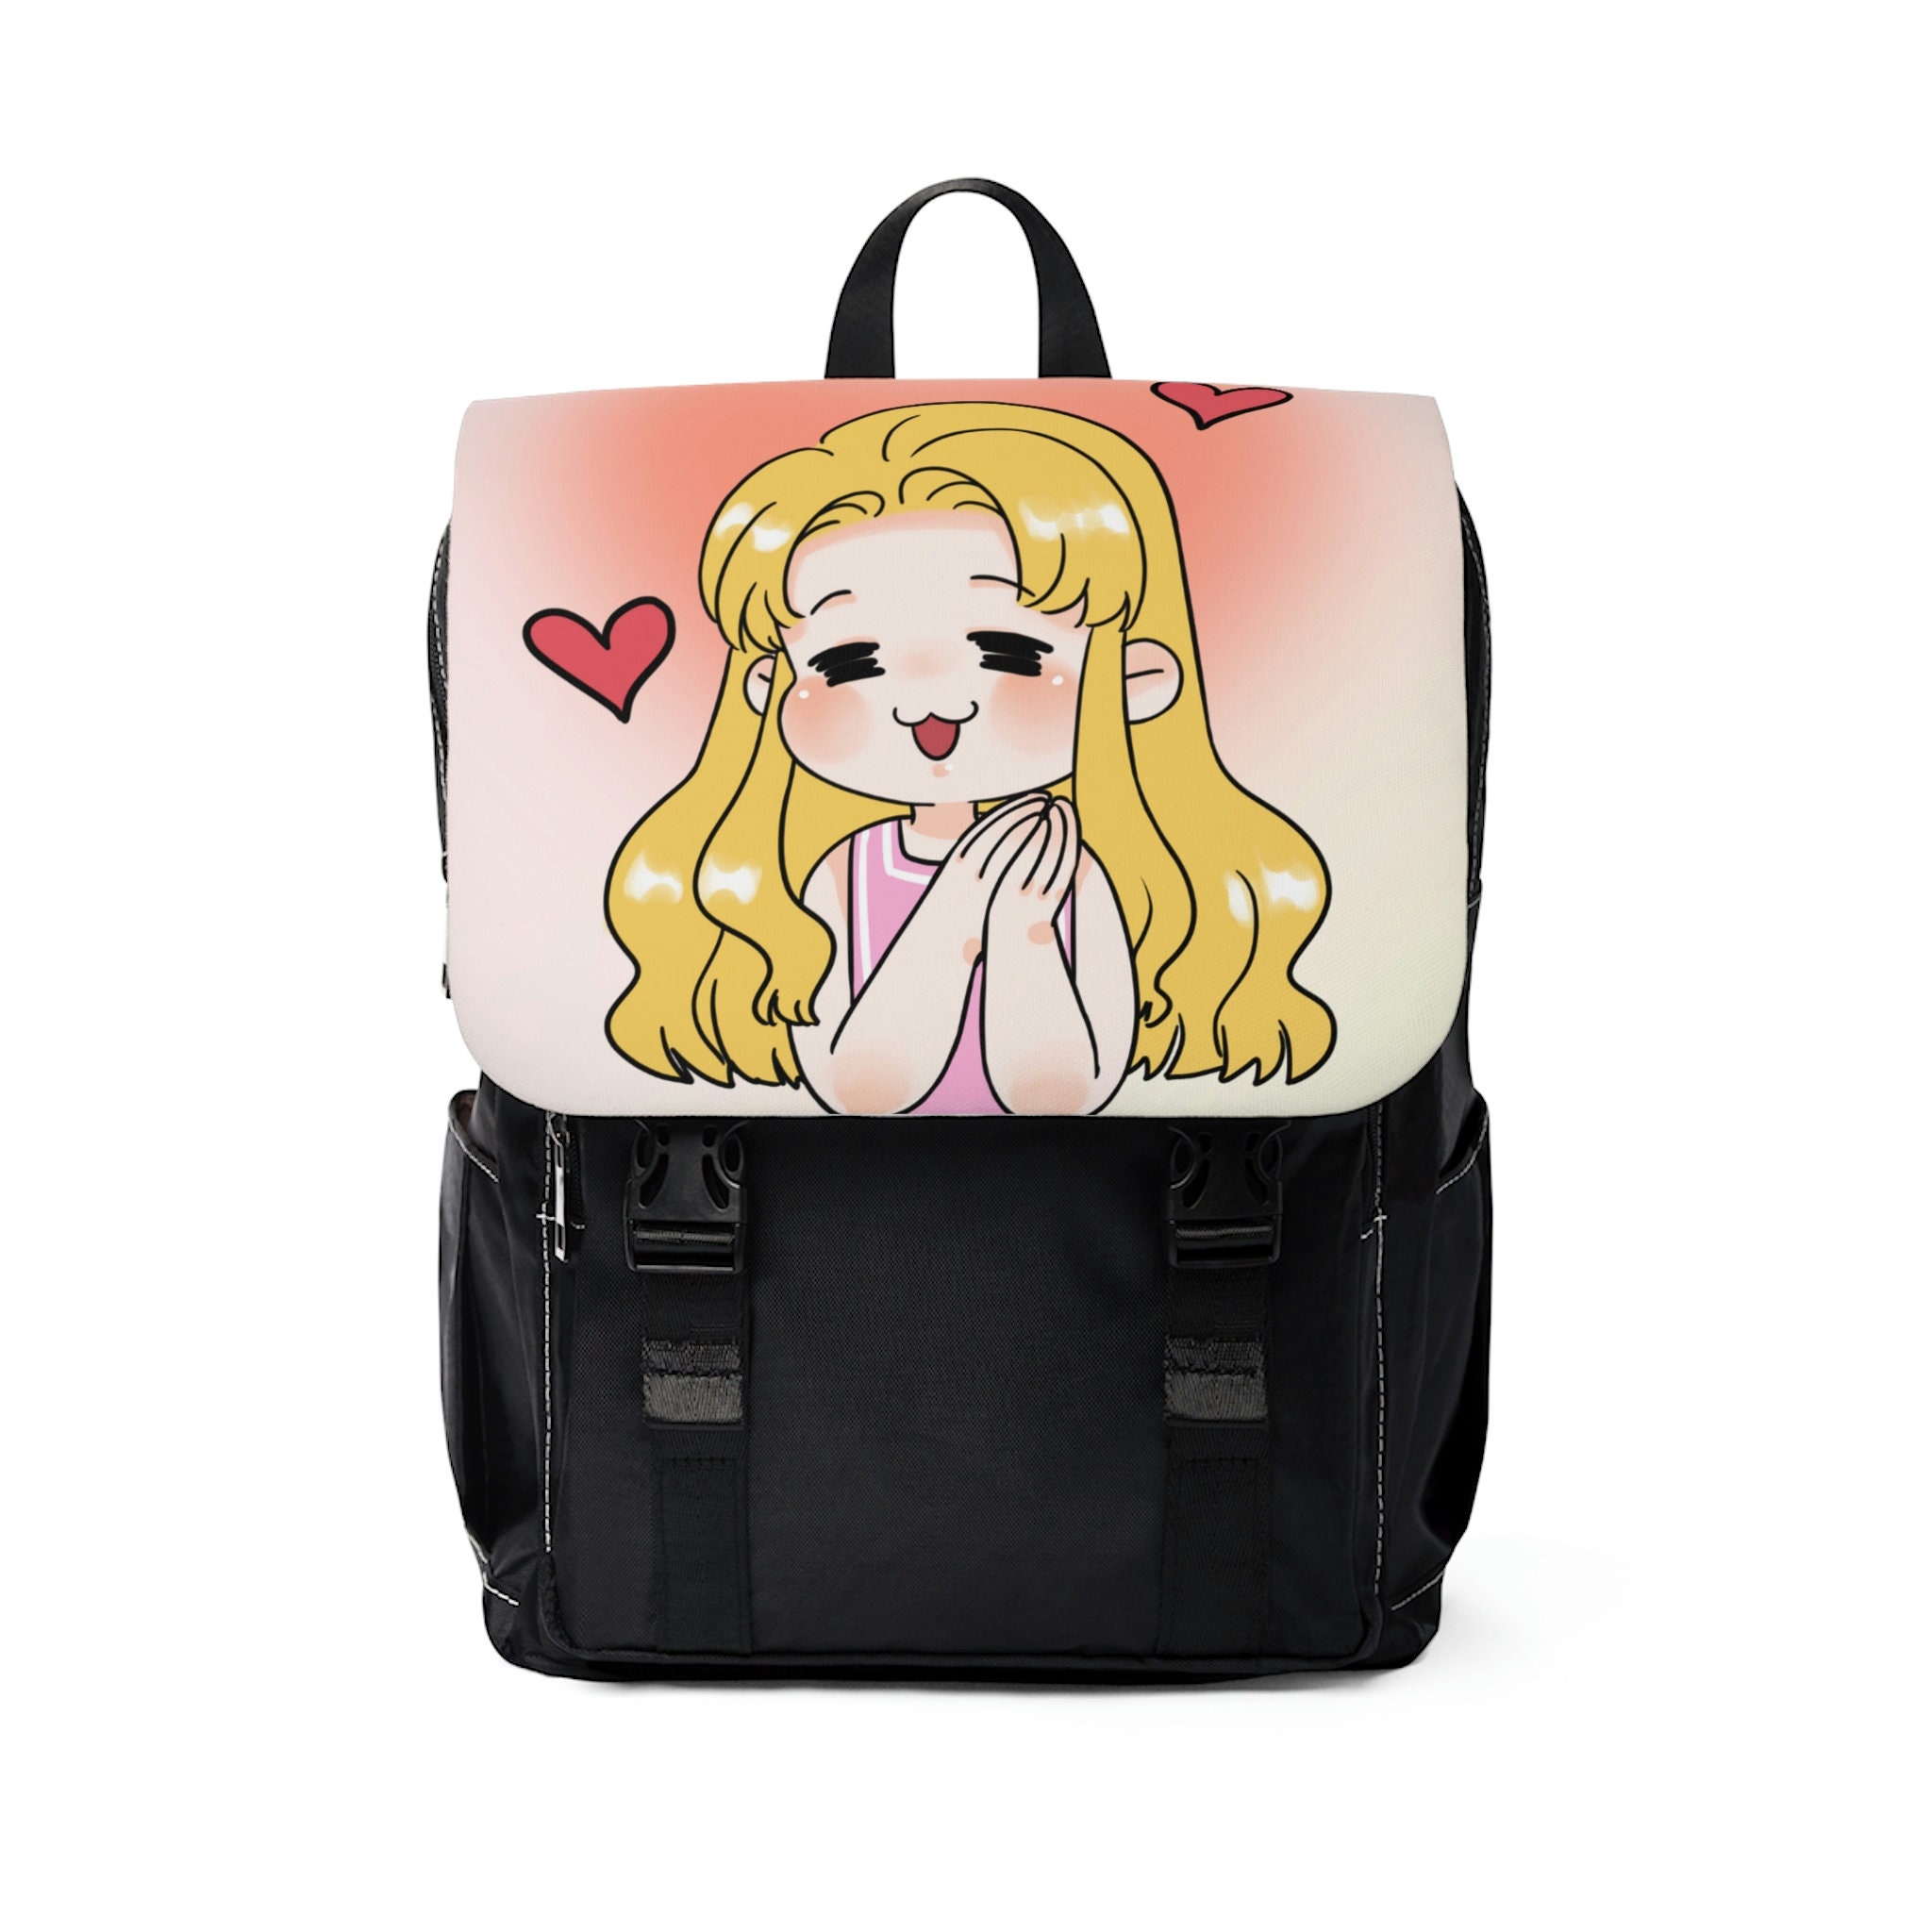 Discover In love Unisex Casual Shoulder Backpack